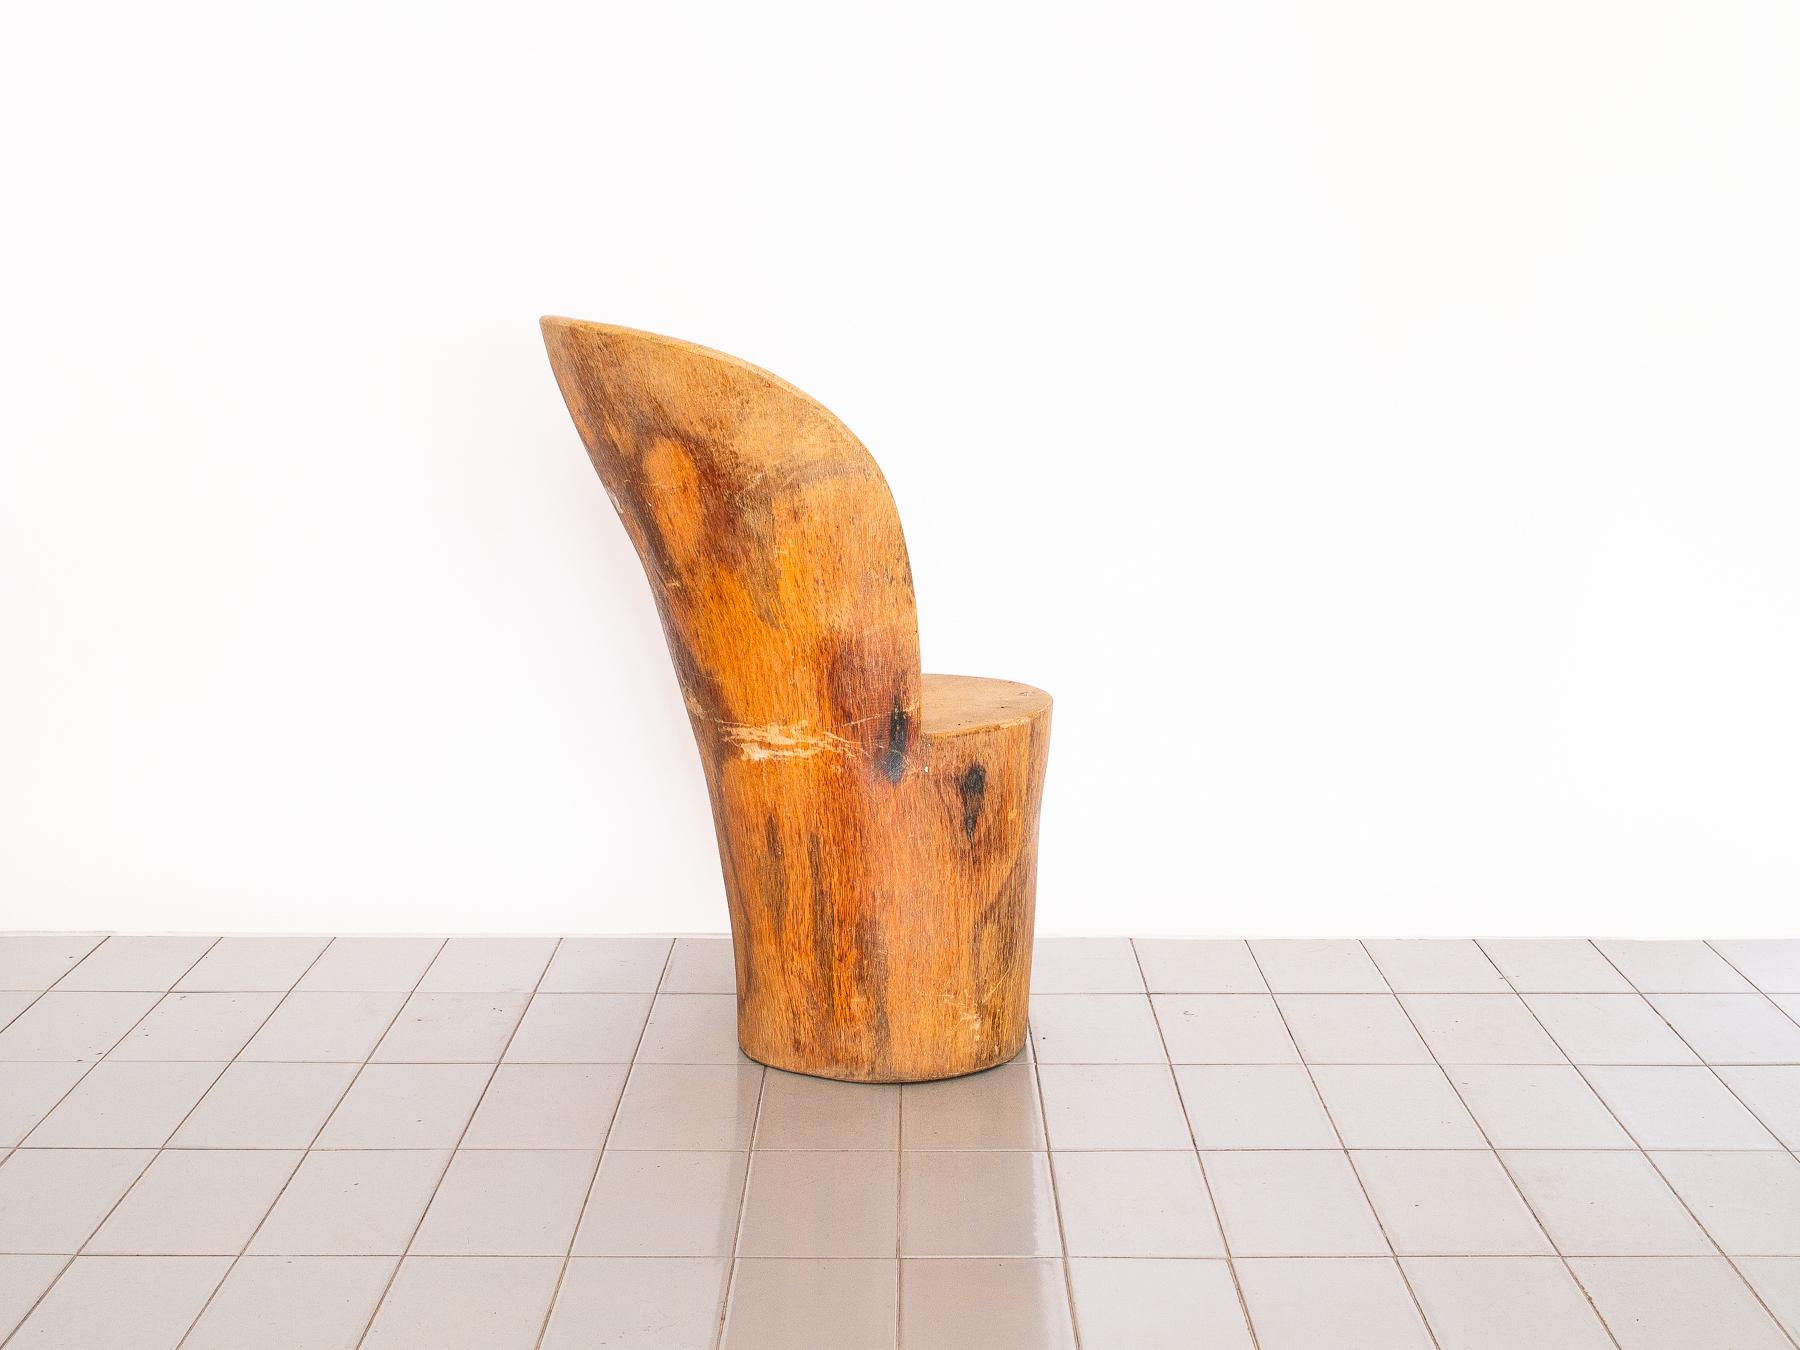 Sculpted solid palmwood trunk chair in the manner of Zanine Caldas, Brazil, 1970s.